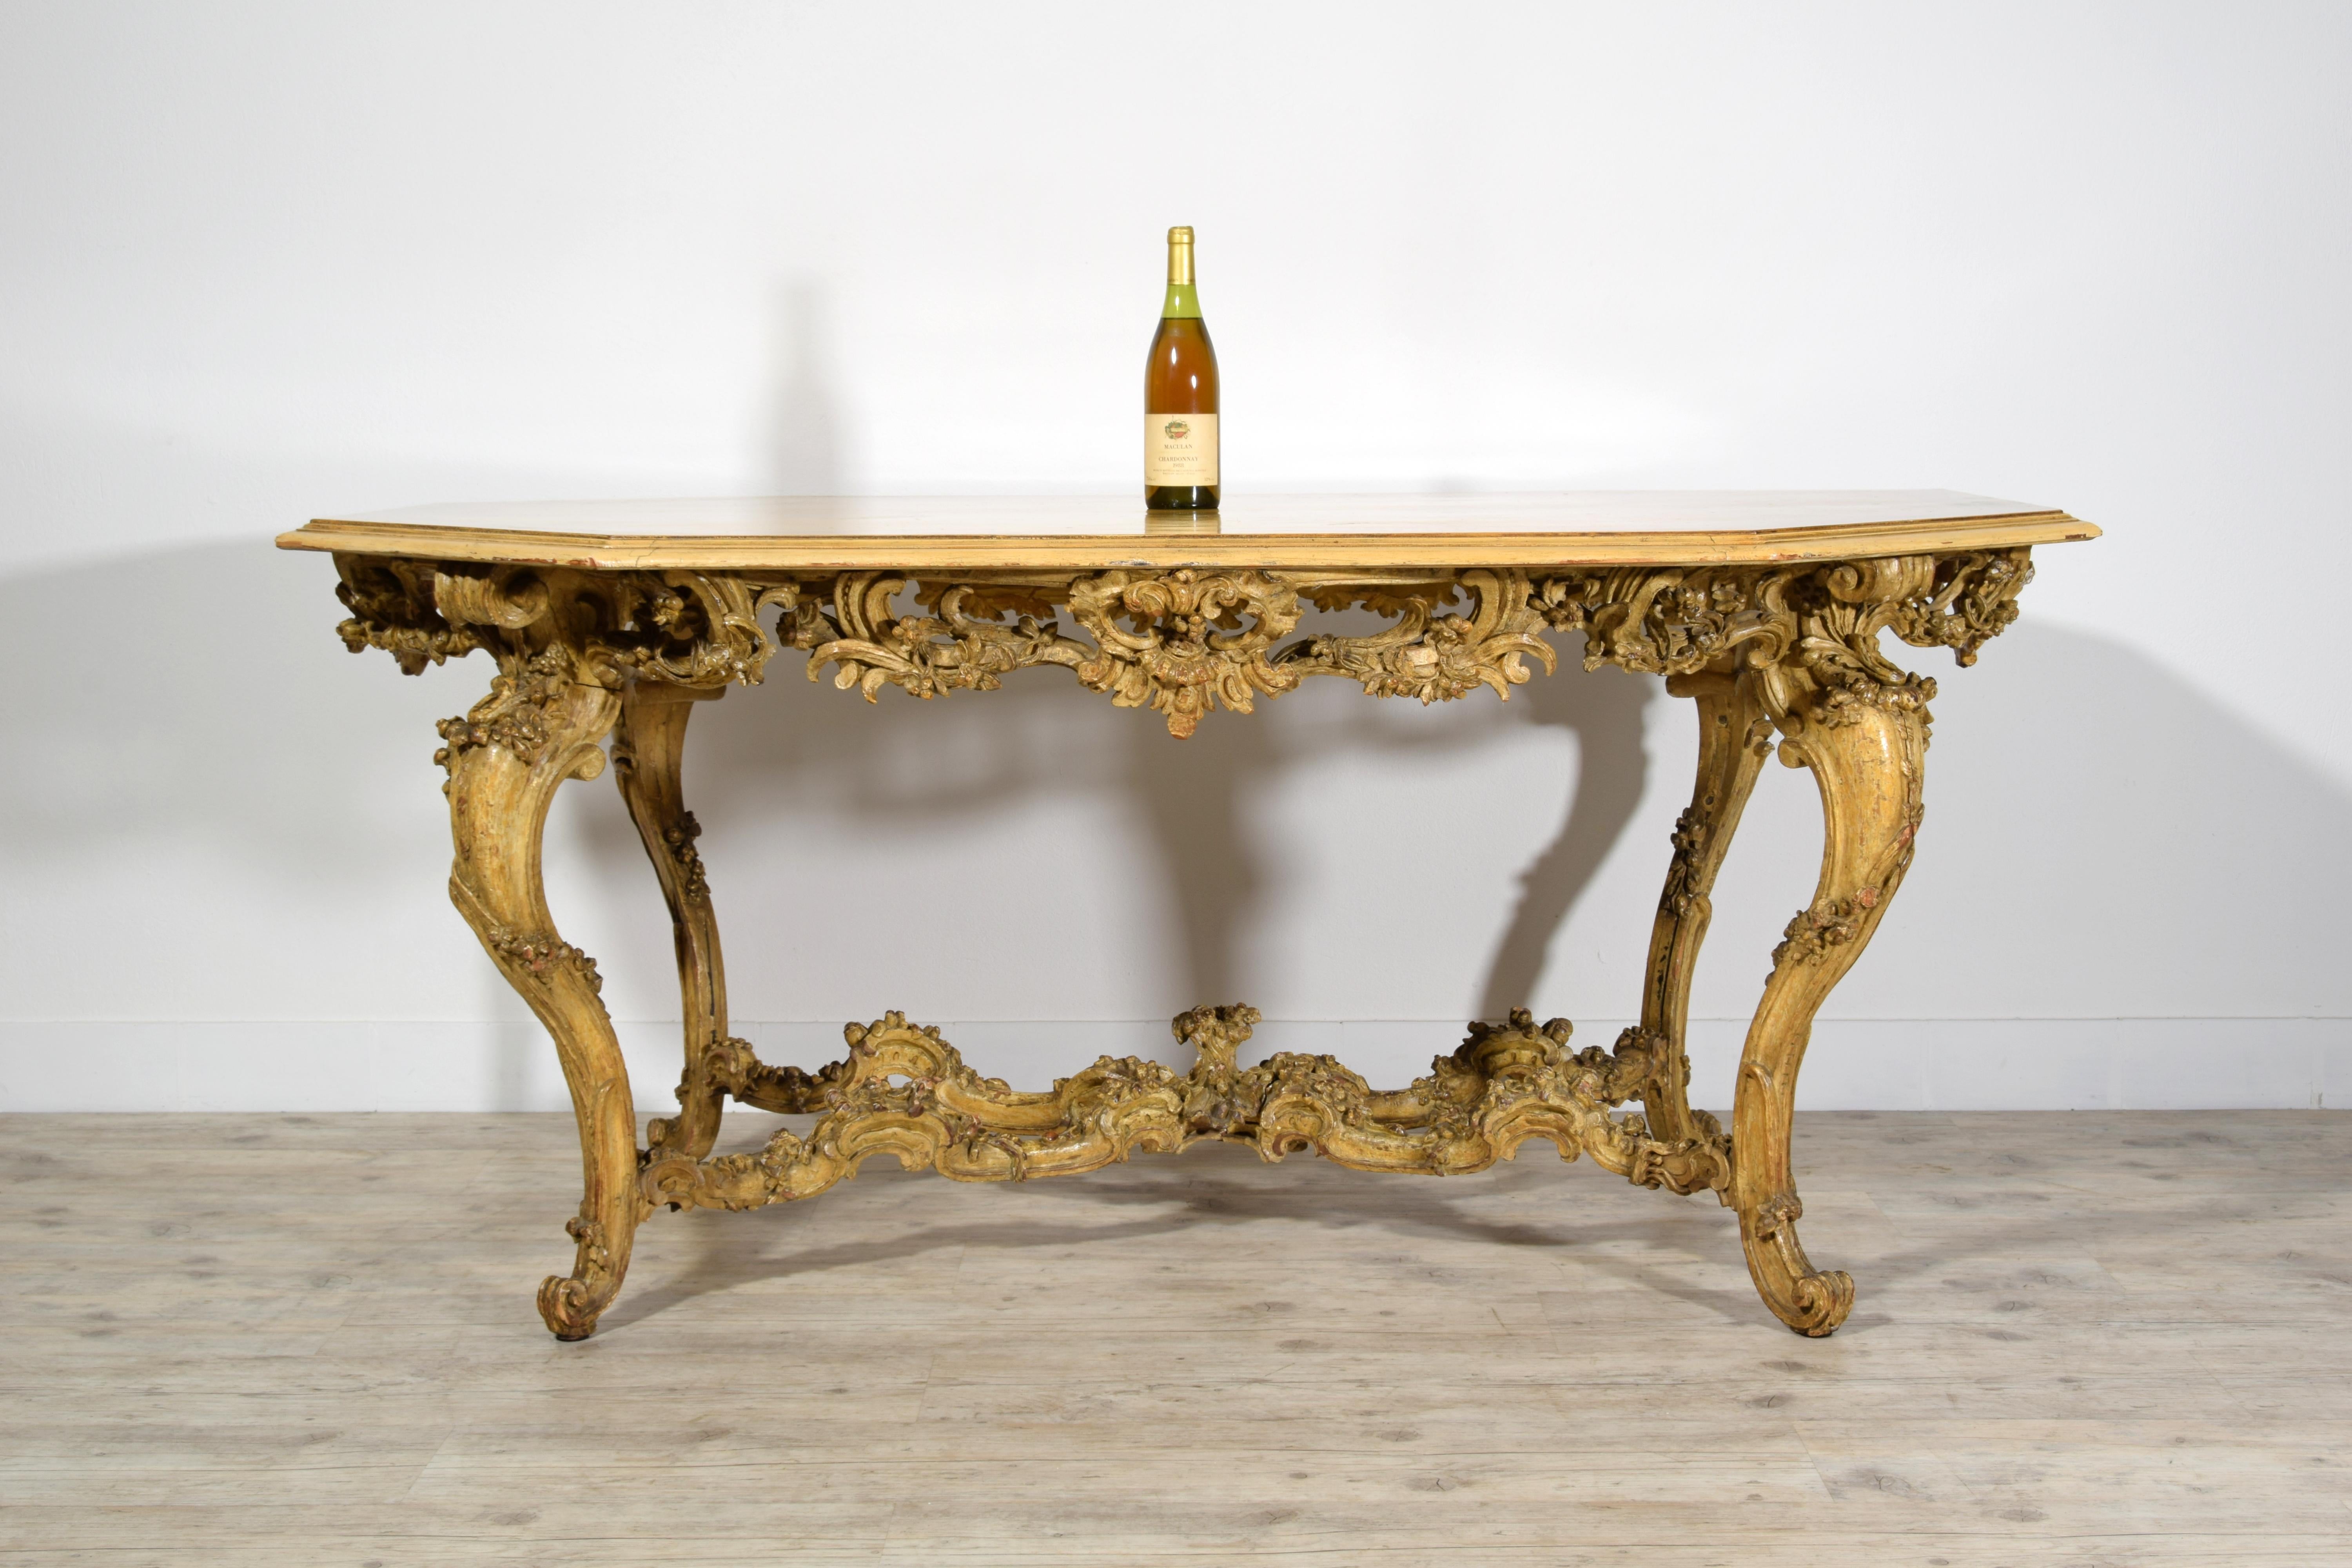 Italian Baroque Carved Gilt and Lacquered Wood Center Table, 18th Century For Sale 9